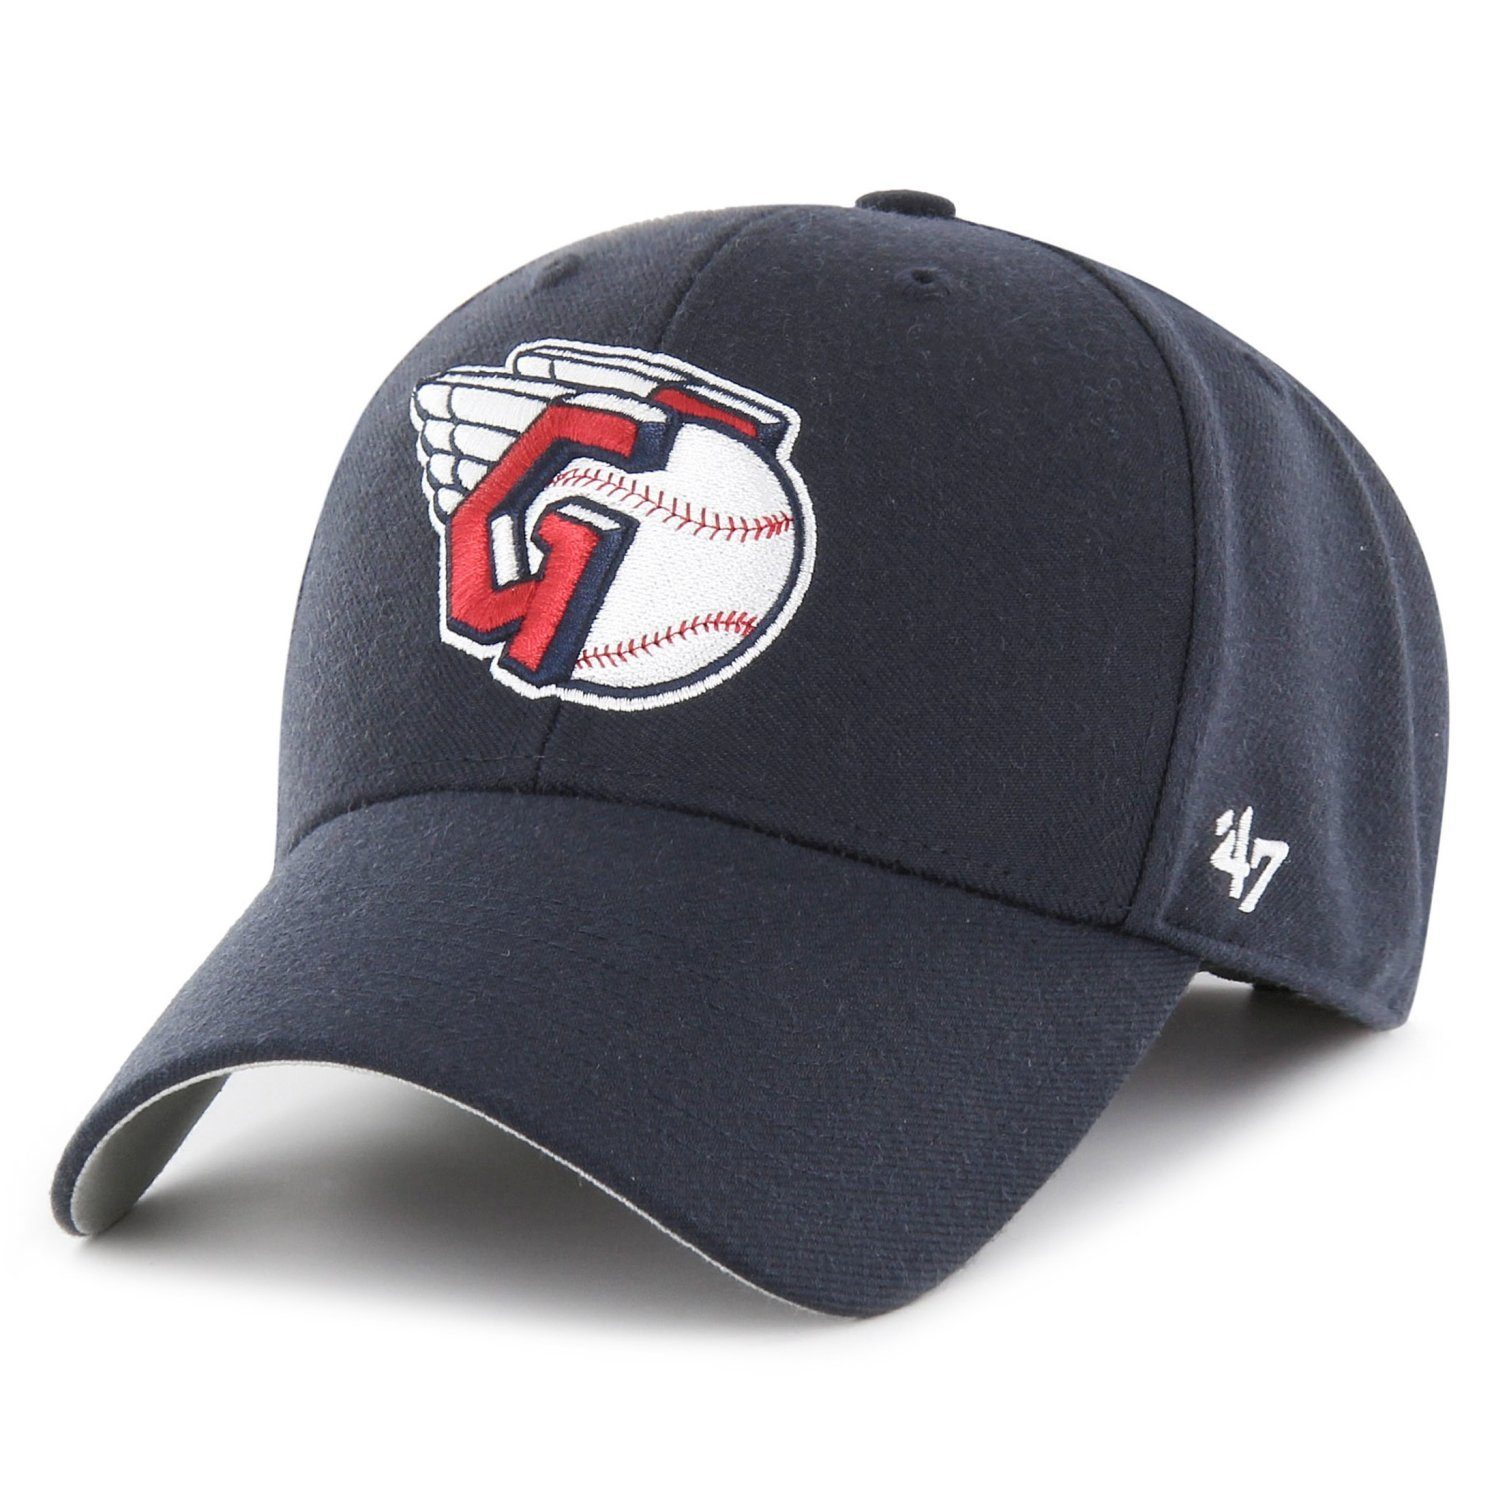 MLB '47 Cleveland Fit Relaxed Cap Brand Guardians Trucker